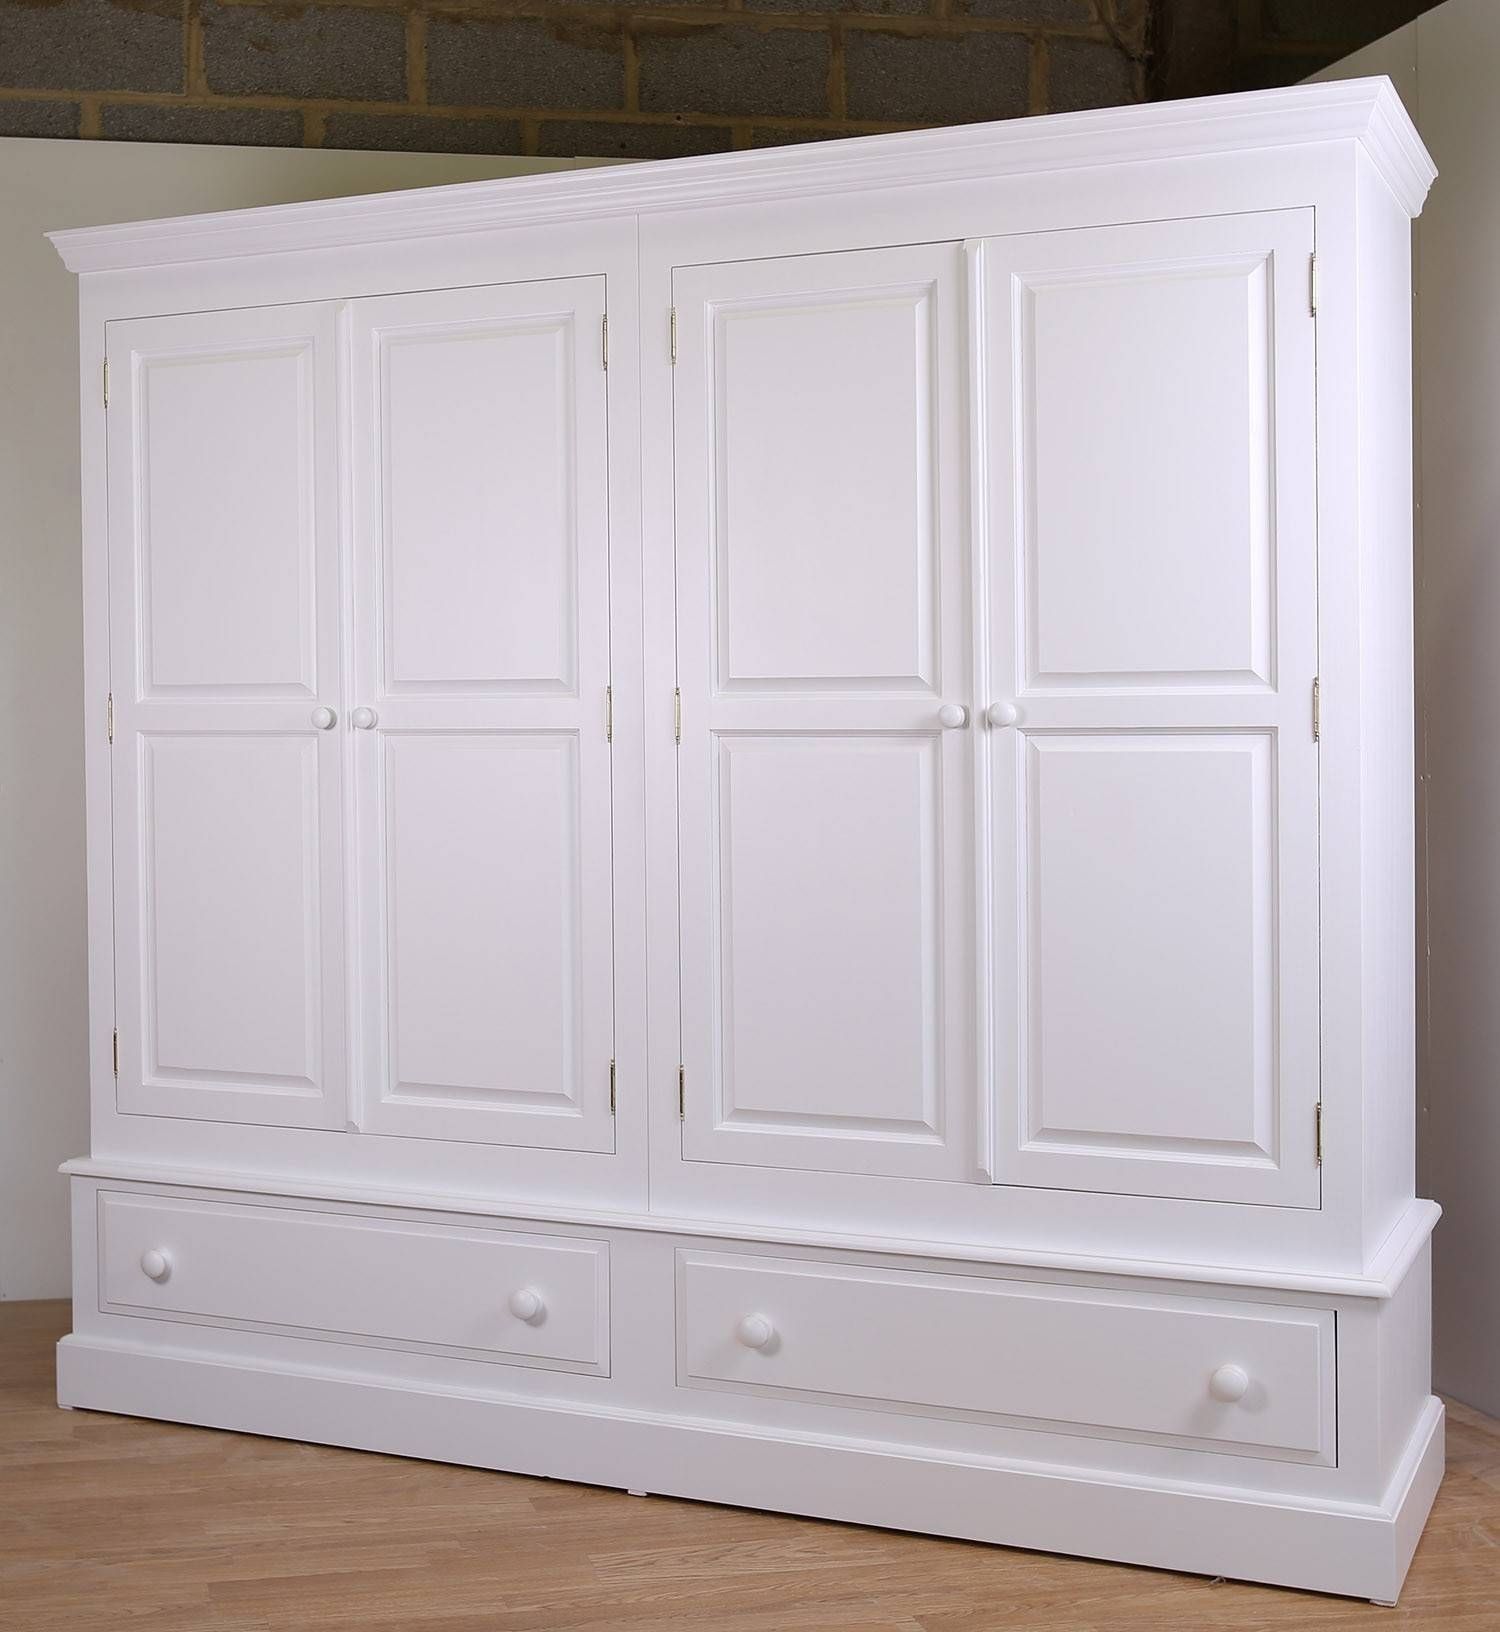 Farrow & Ball Painted 4 Door Wardrobe With Drawers In 3 Sizes Regarding Large White Wardrobes With Drawers (View 2 of 15)